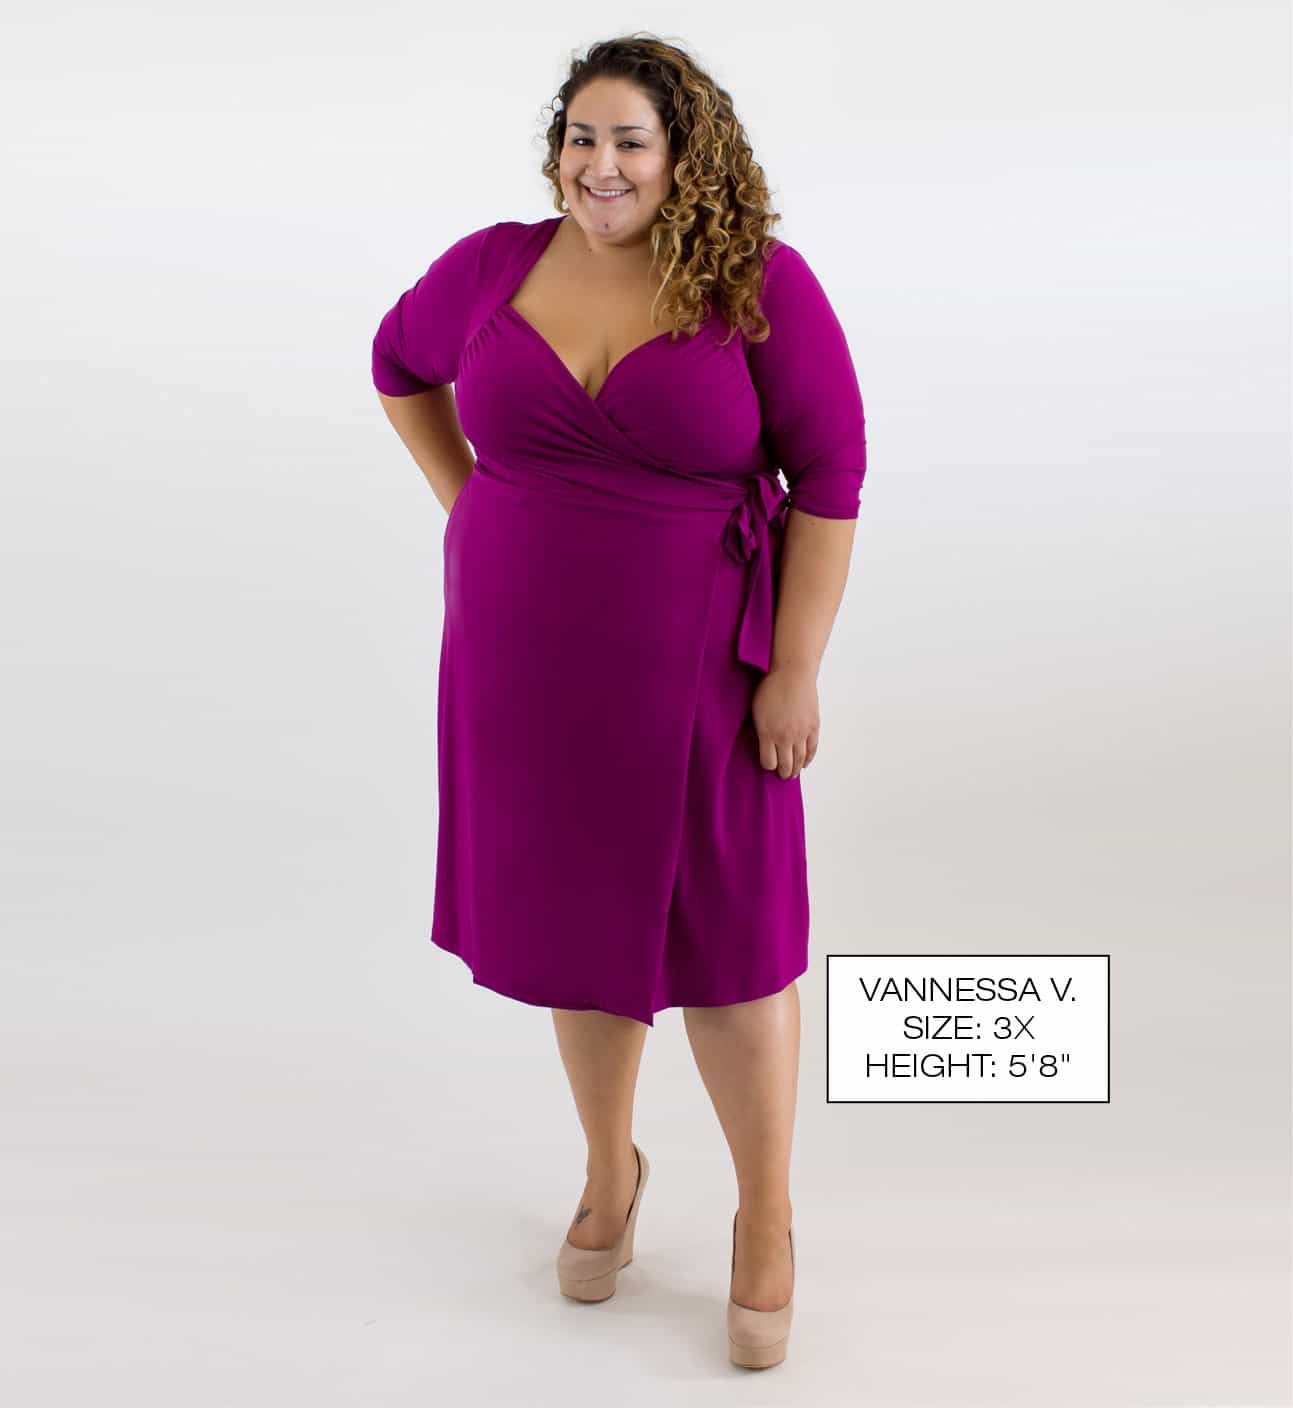 Download this Showing Plus Size Fashion Real Women Models Sizes picture